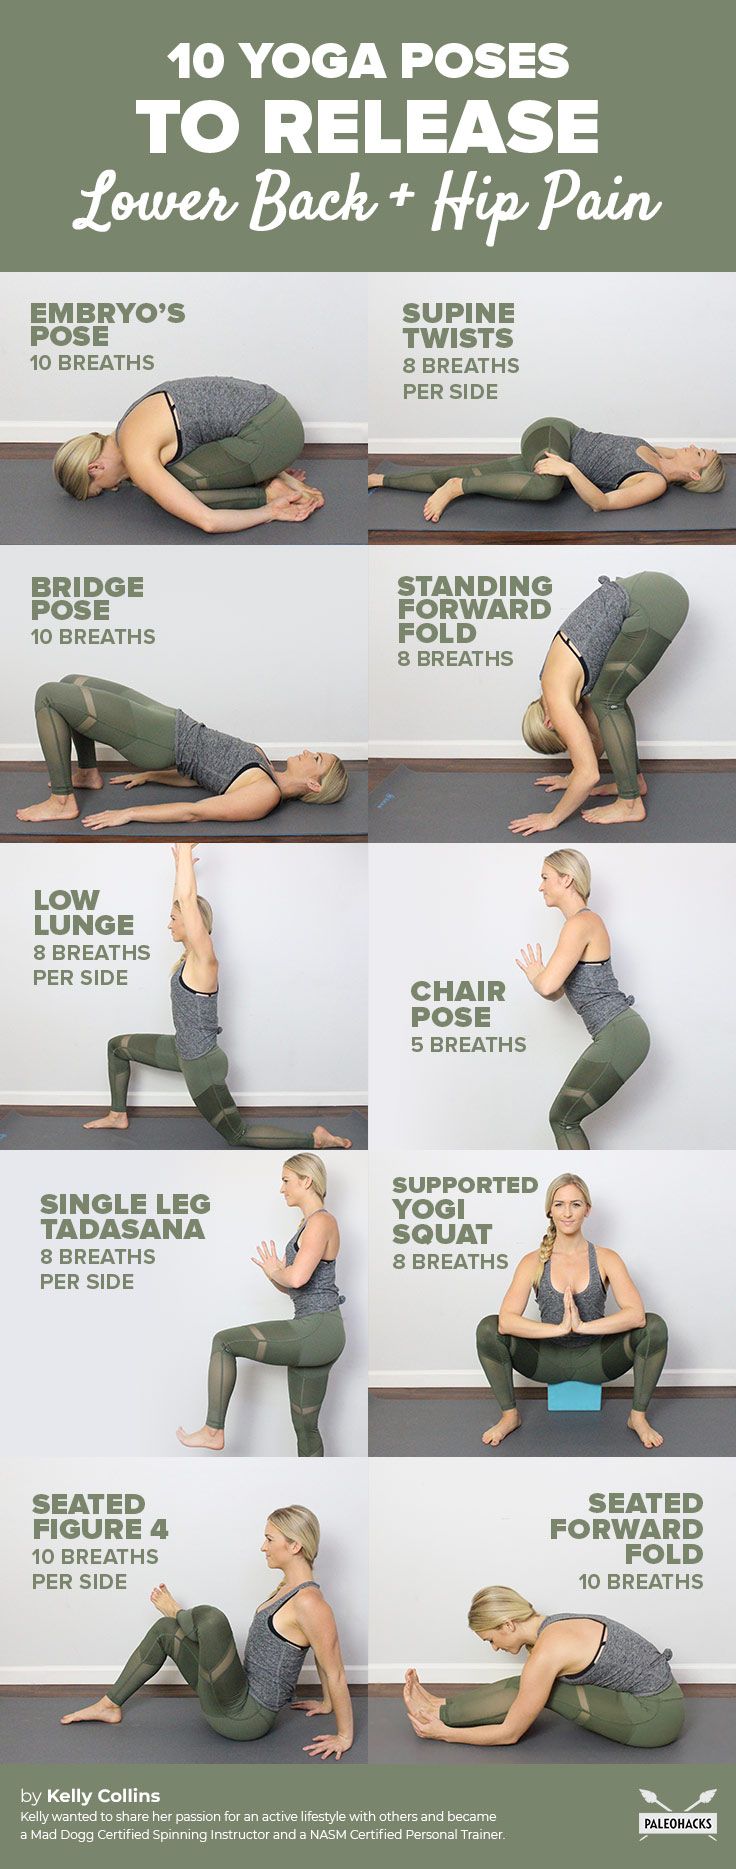 Lower back & hip poses